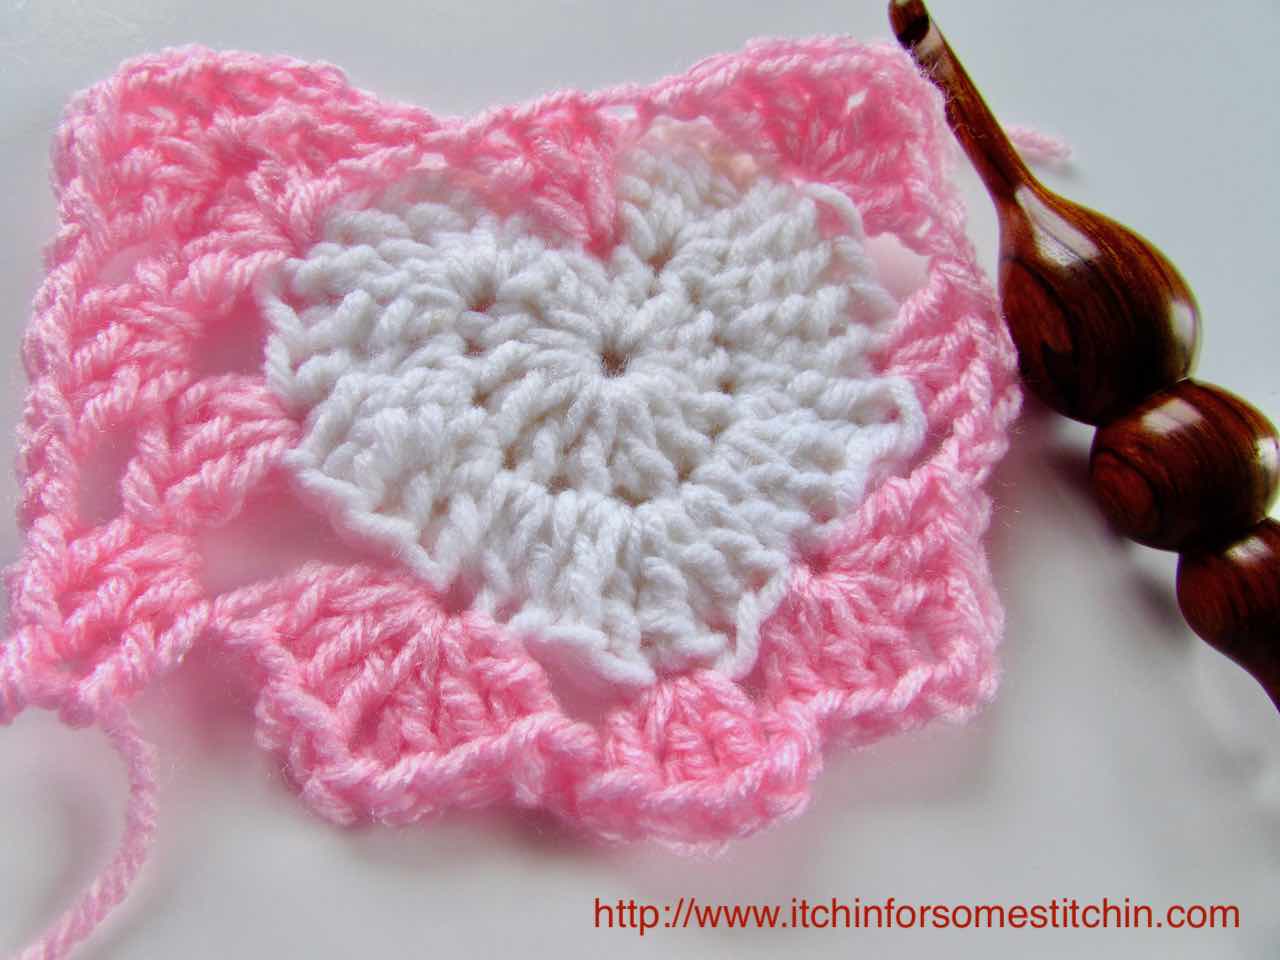 How to crochet a Granny Heart Square tutorial by http://www.itchinforsomestitchin.com